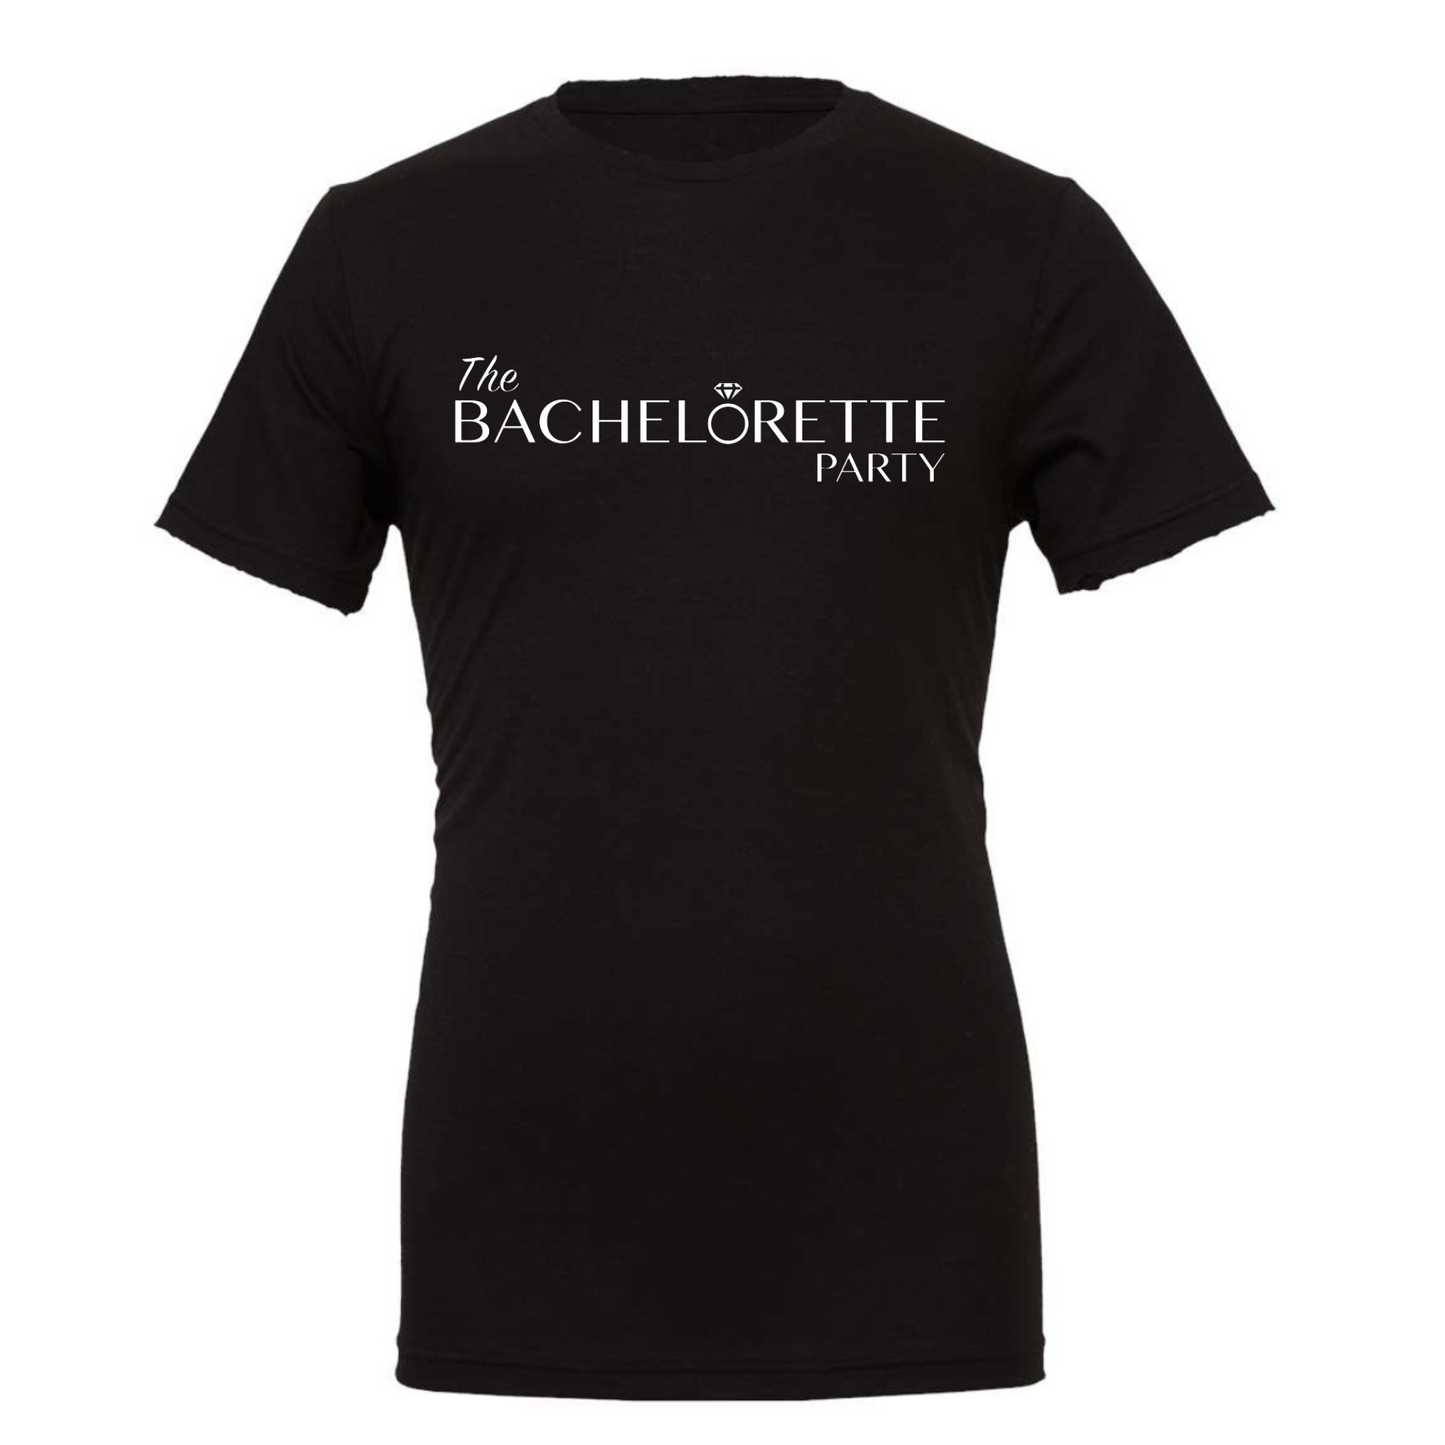 The Bachelorette Party T-Shirt in black. The design in on the front is in white with "The" being smaller script font, "Bachelorette" and "Party" being a bold font. The O in Bachelorette is a diamond ring. This the front view of the shirt.